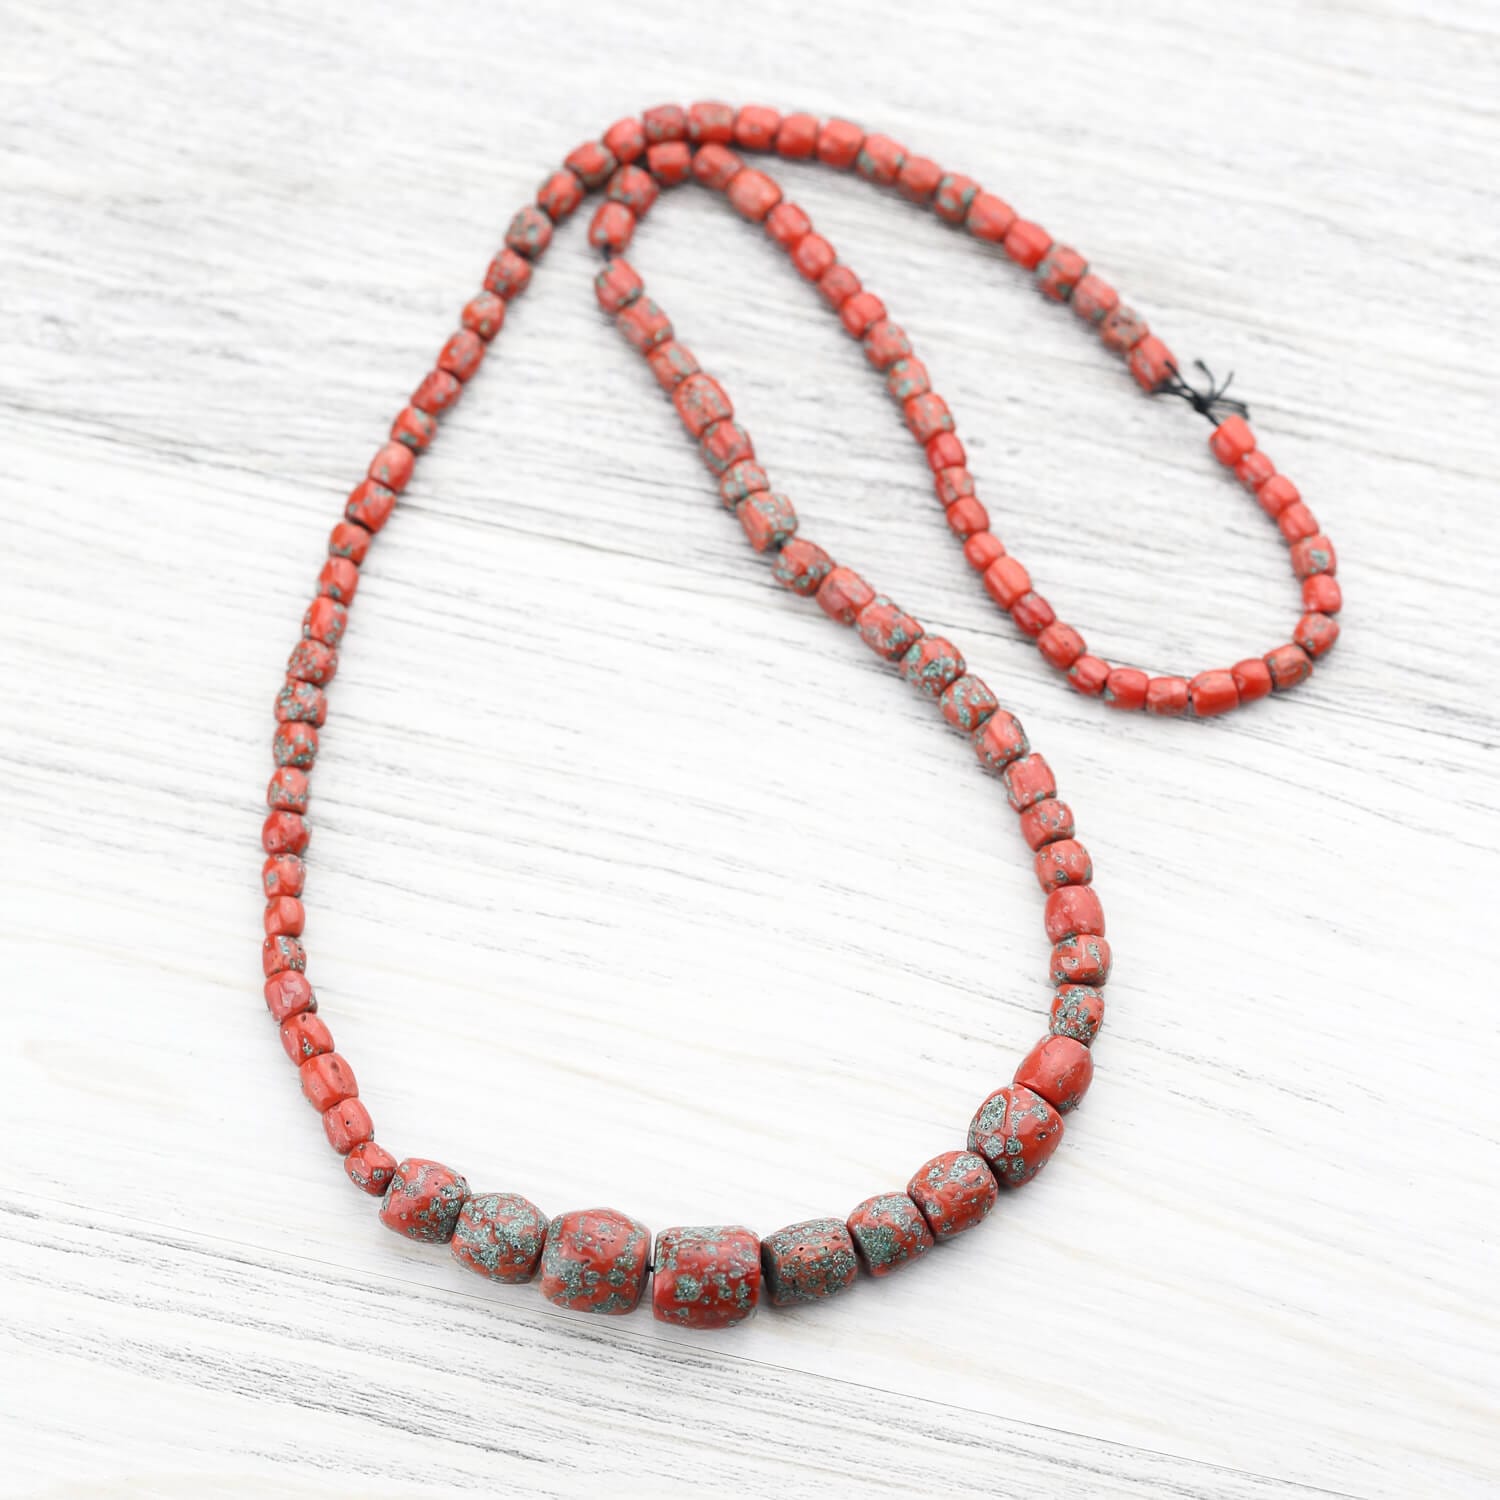 Genuine Antique Tibetan Red Coral and Old Dzi bead Mala Necklace